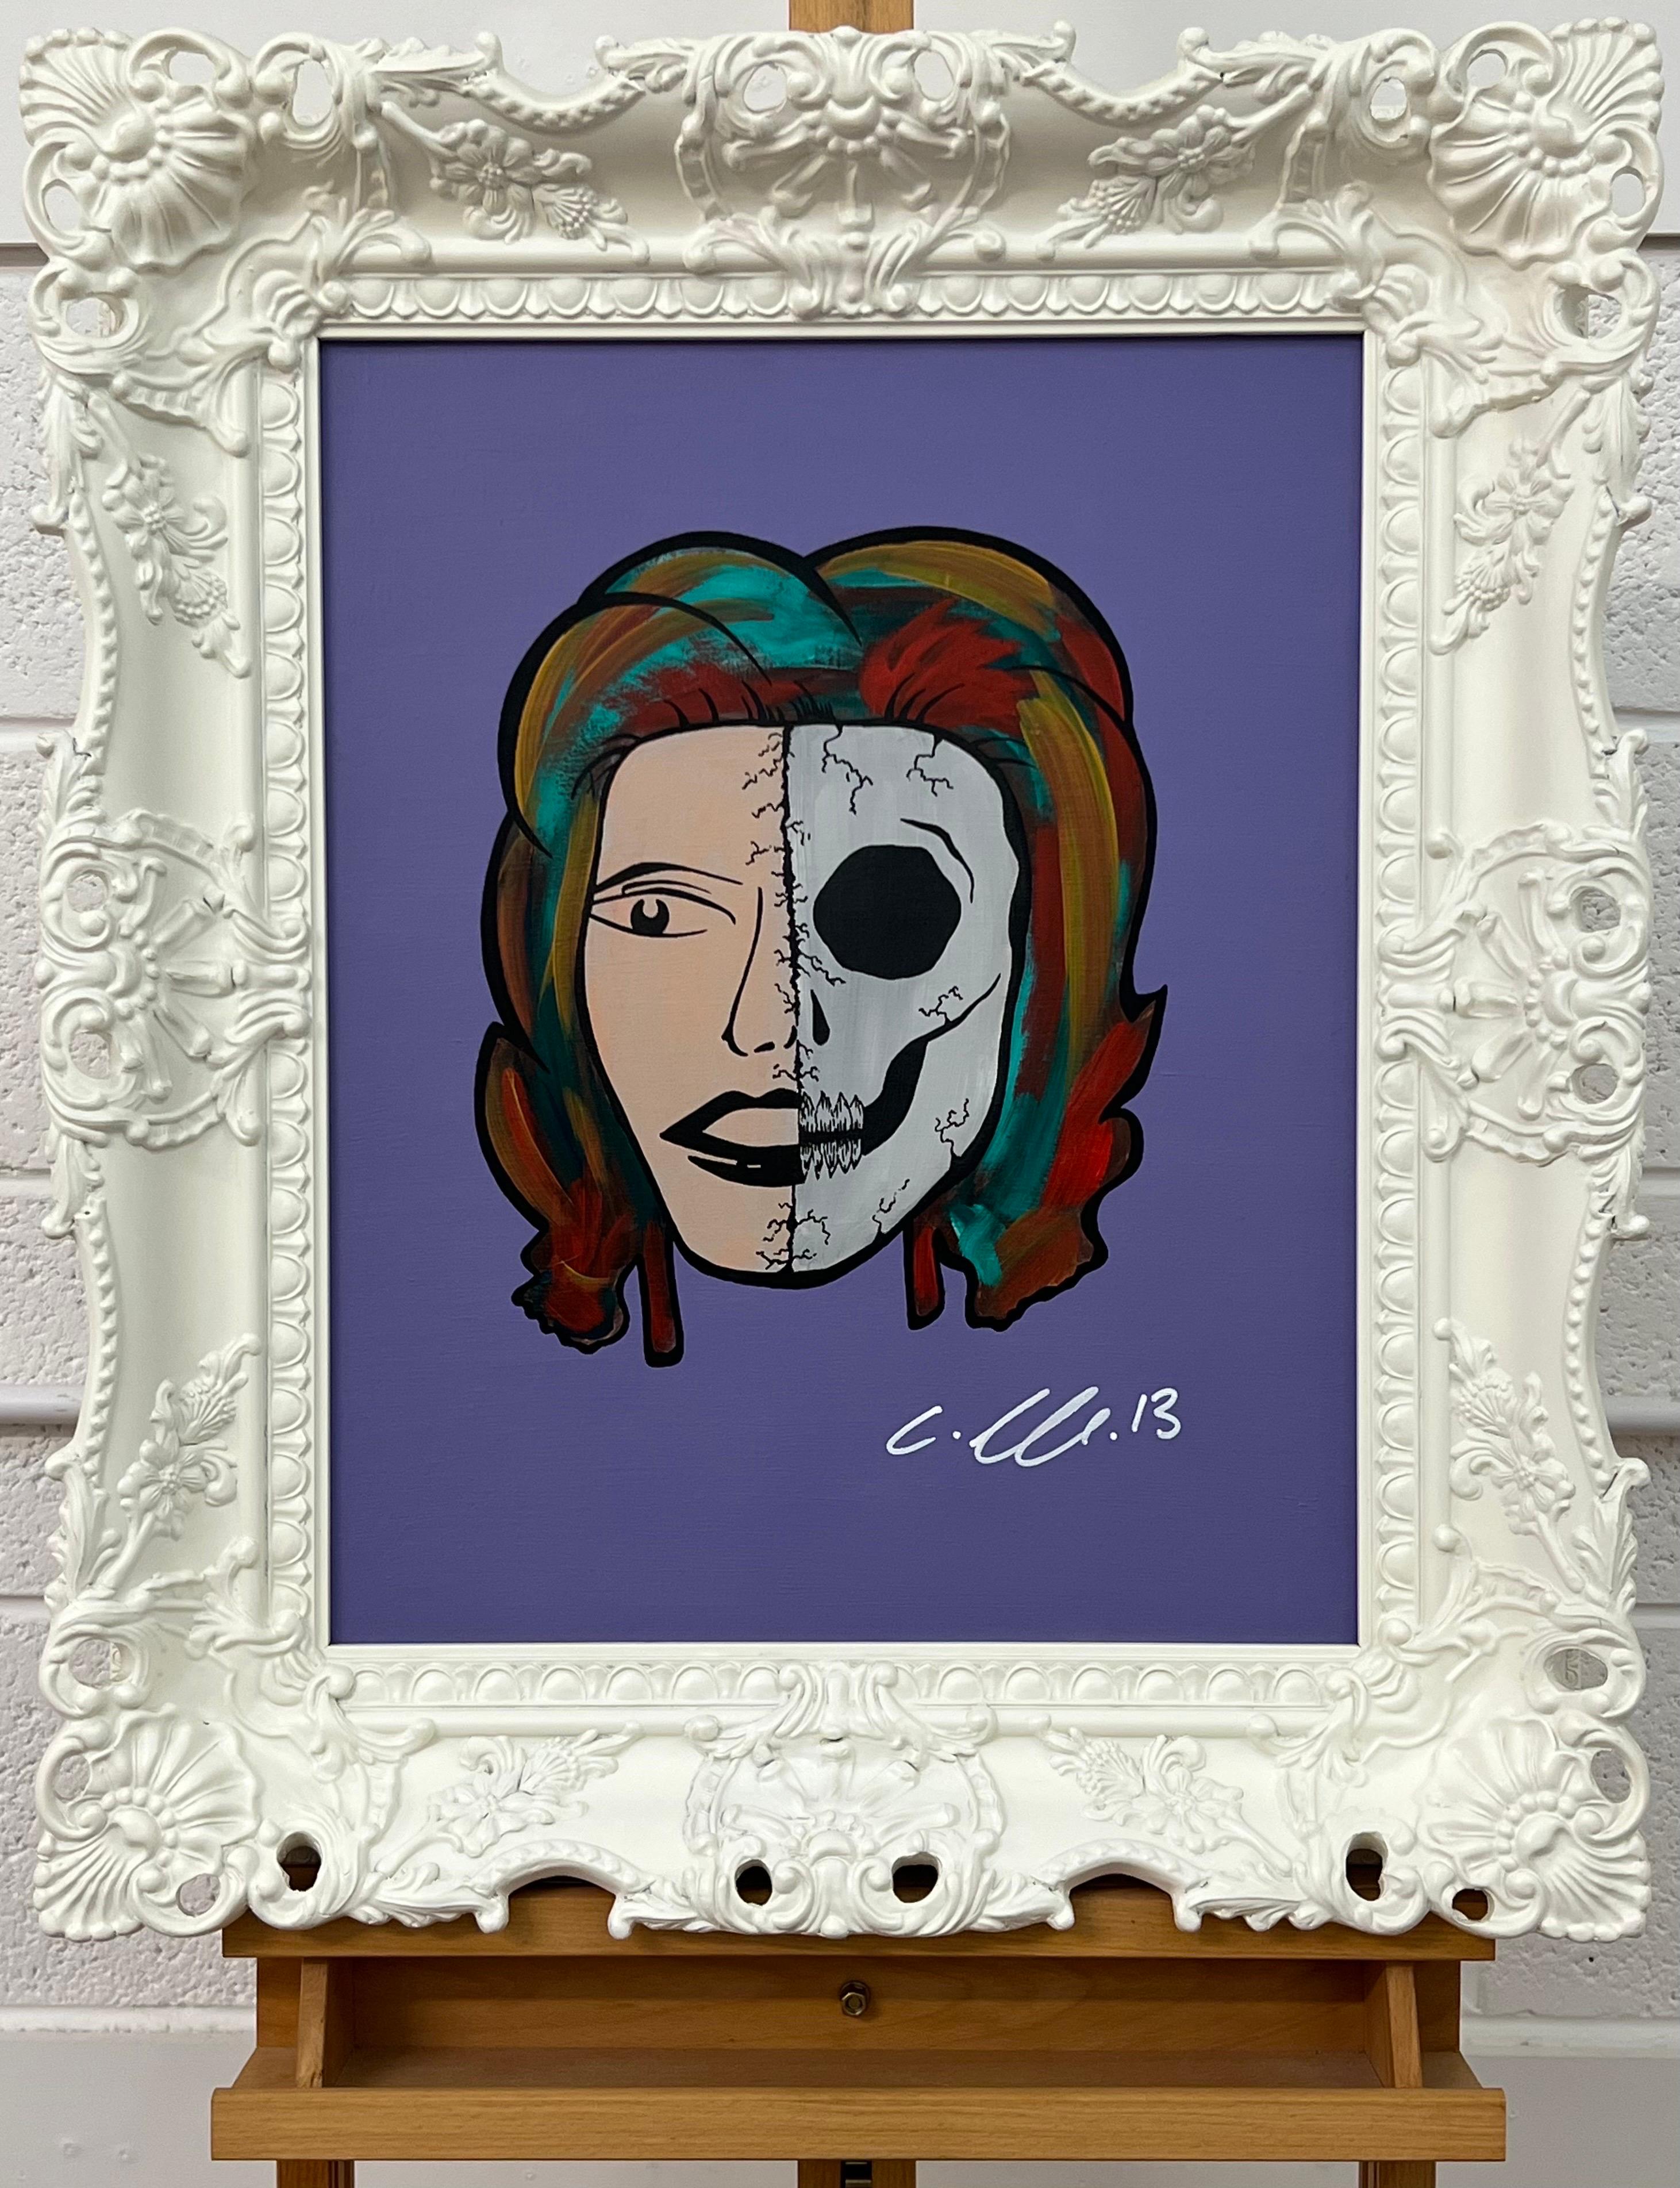 Half Skull & Female Face Portrait Pop Art by British Urban Graffiti Artist, Chris Pegg. Lilac Background. Presented in a high quality ornate white frame. 

Art measures 20 x 16 inches 
Frame measures 26 x 22 inches 

Chris Pegg is a self-taught